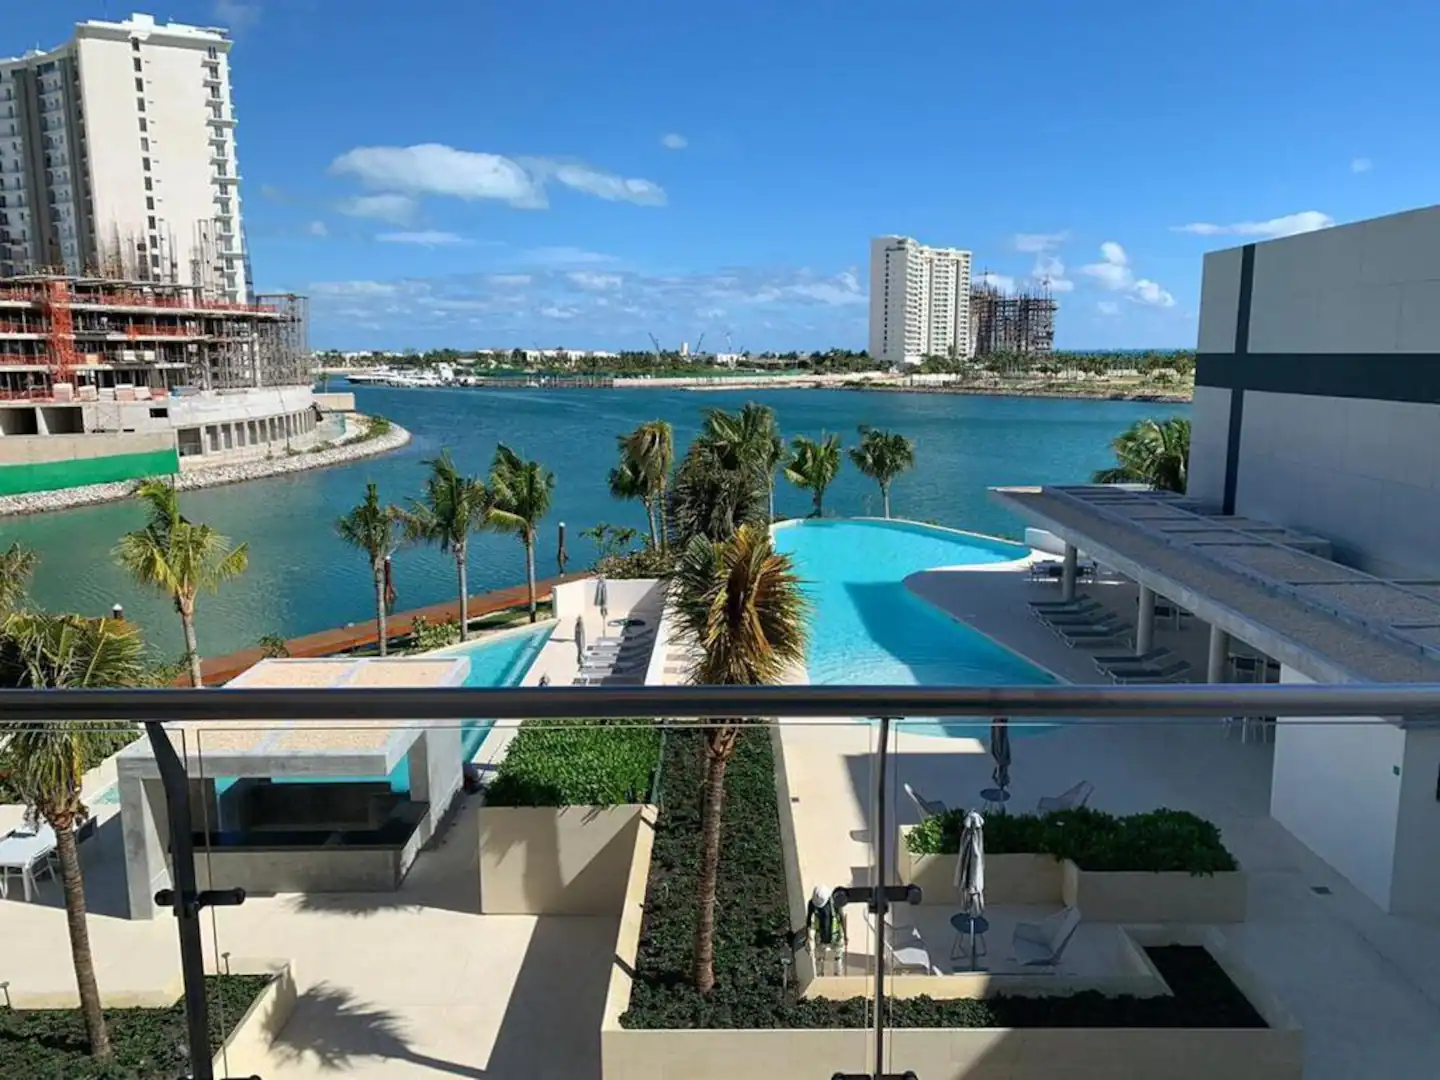 One of the best Airbnbs in Cancun, Beautiful Apartment With Ocean View